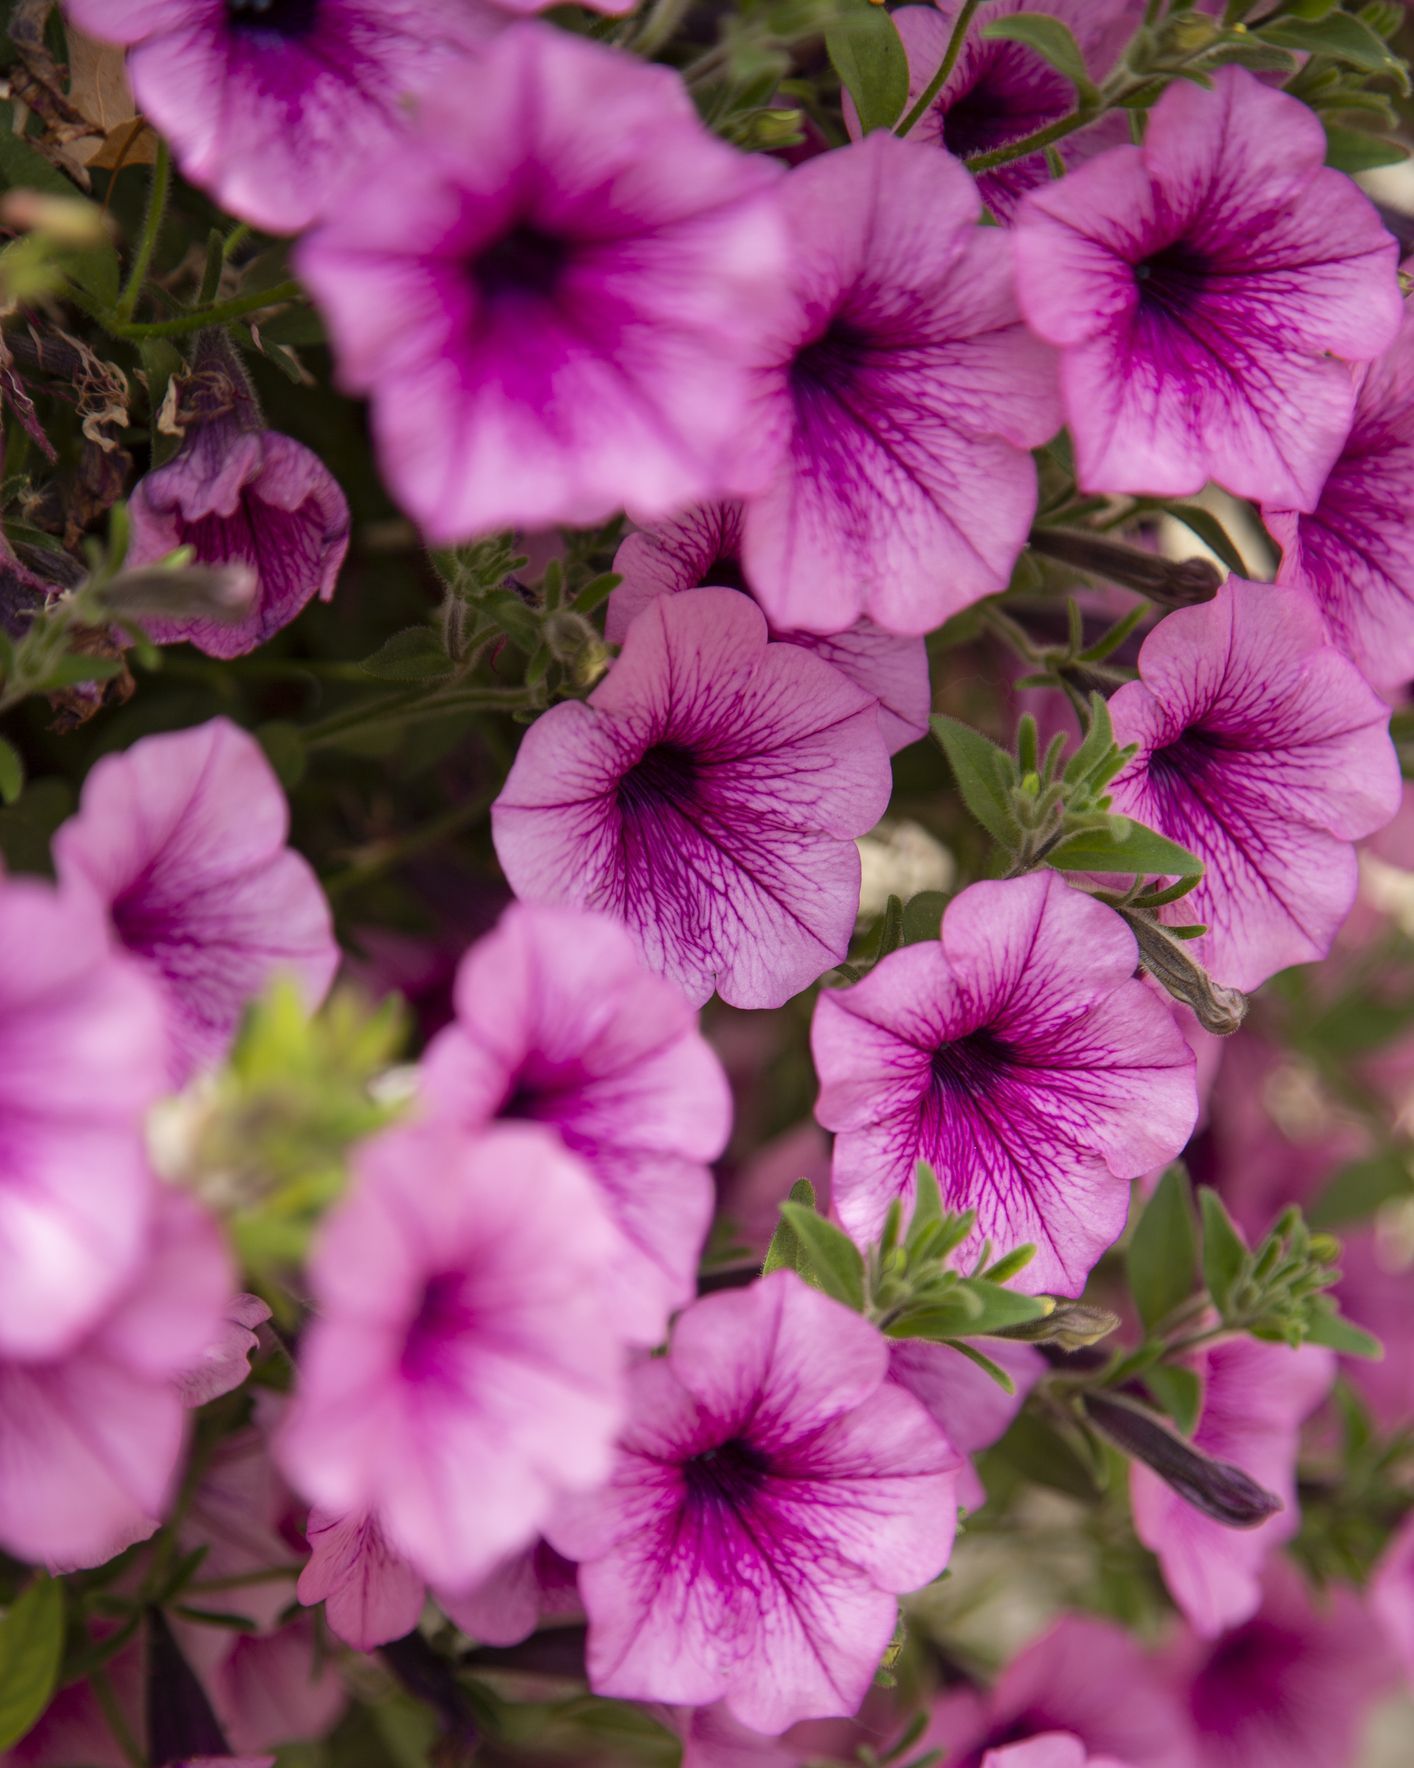 petunia, an annual flowering plant with profuse trumpet shaped blooms